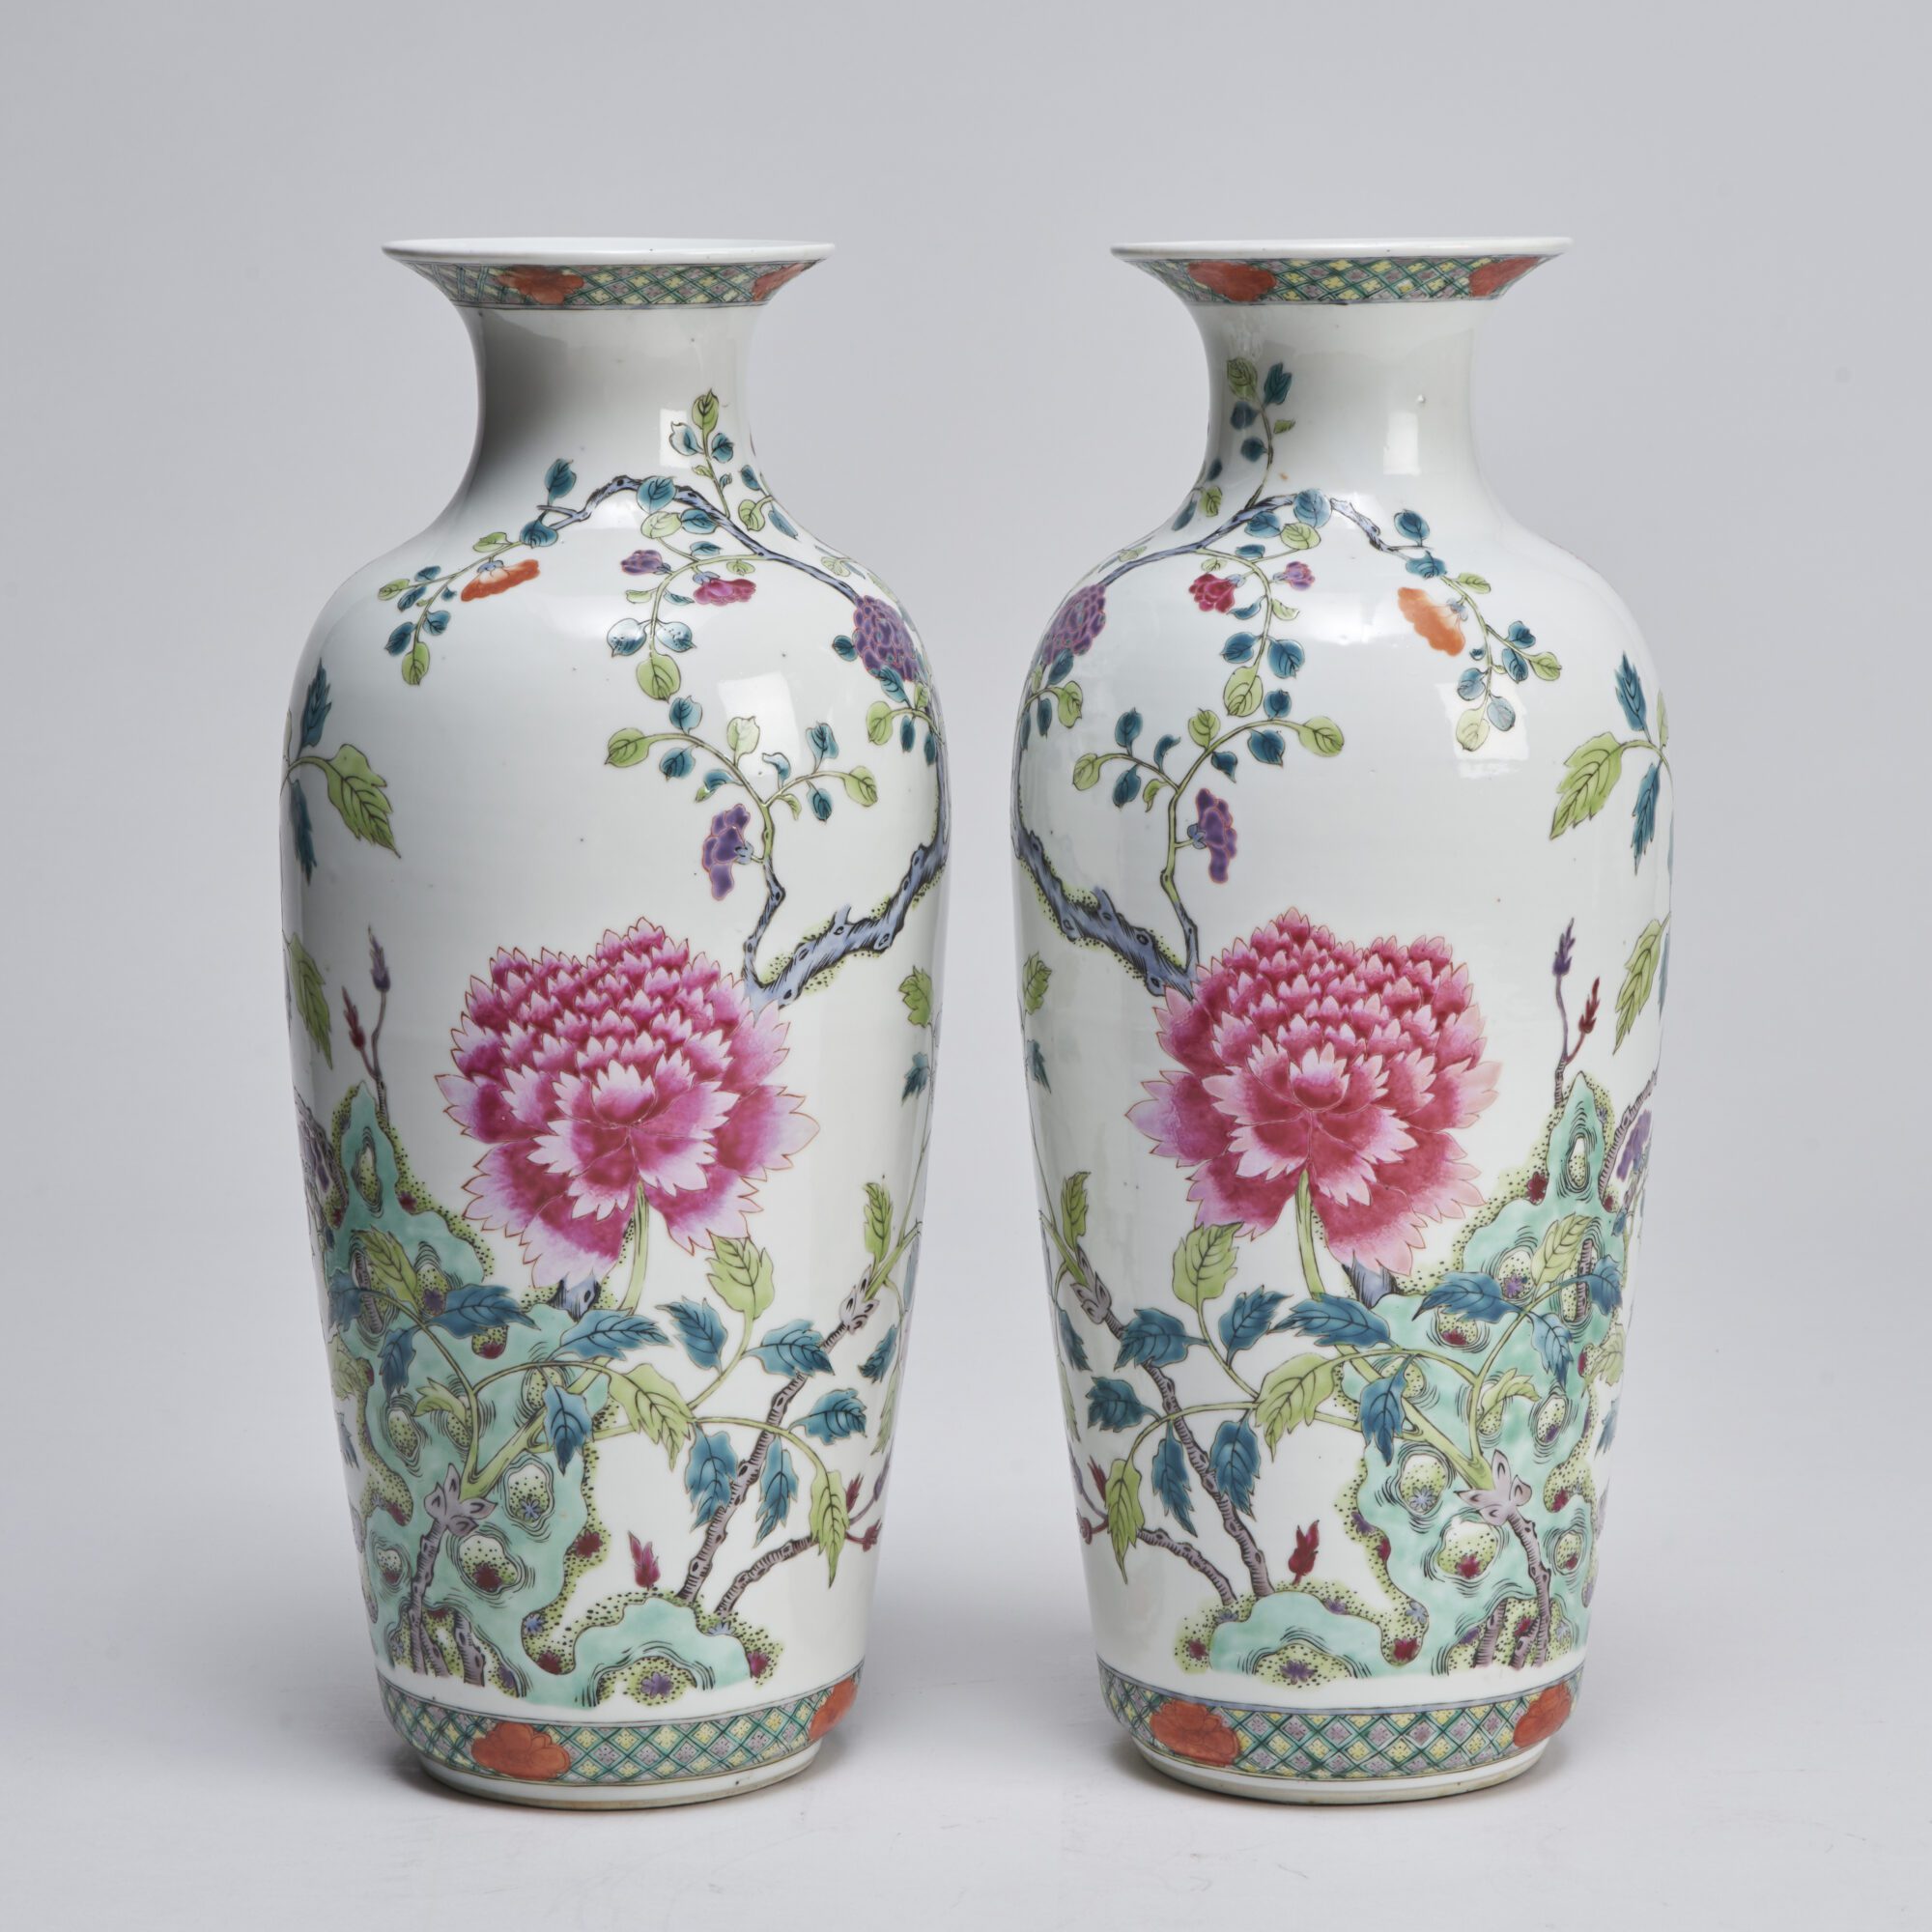 An attractive pair of Chinese 19th Century Famille Rose vases from Kevin Page